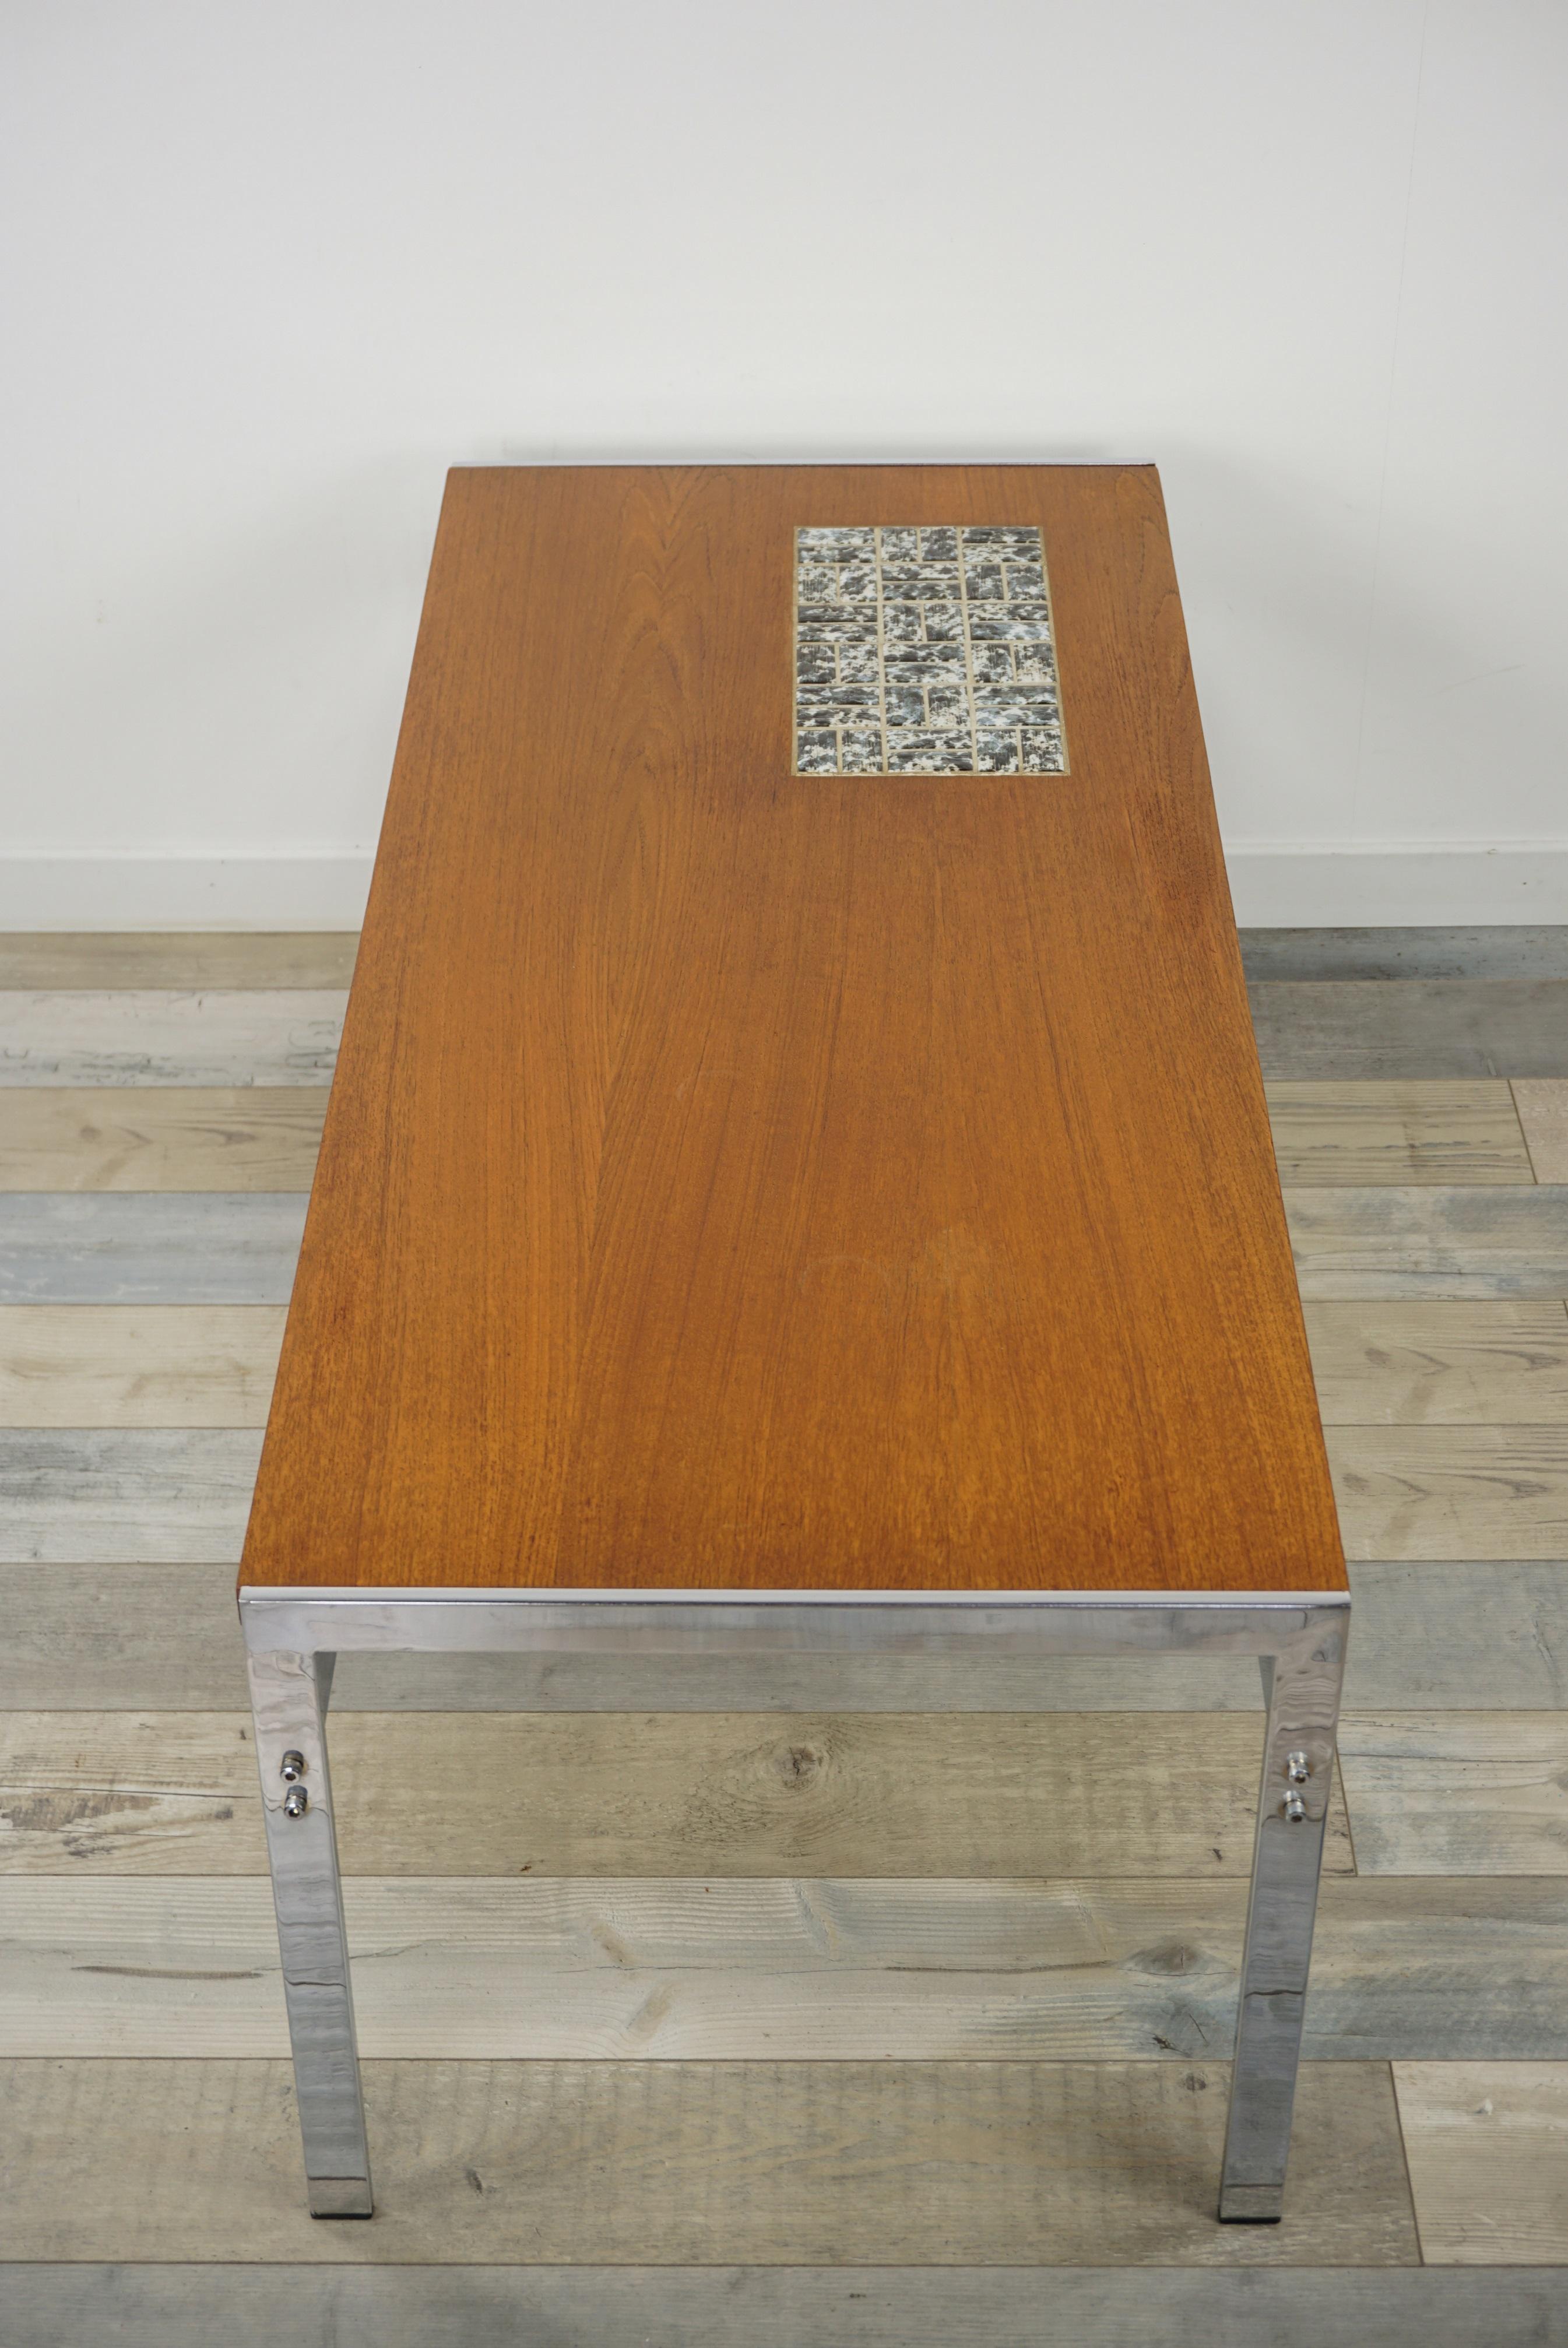 20th Century Rectangular 1960s Design Chrome Metal And Teak Wooden Coffee Table  For Sale